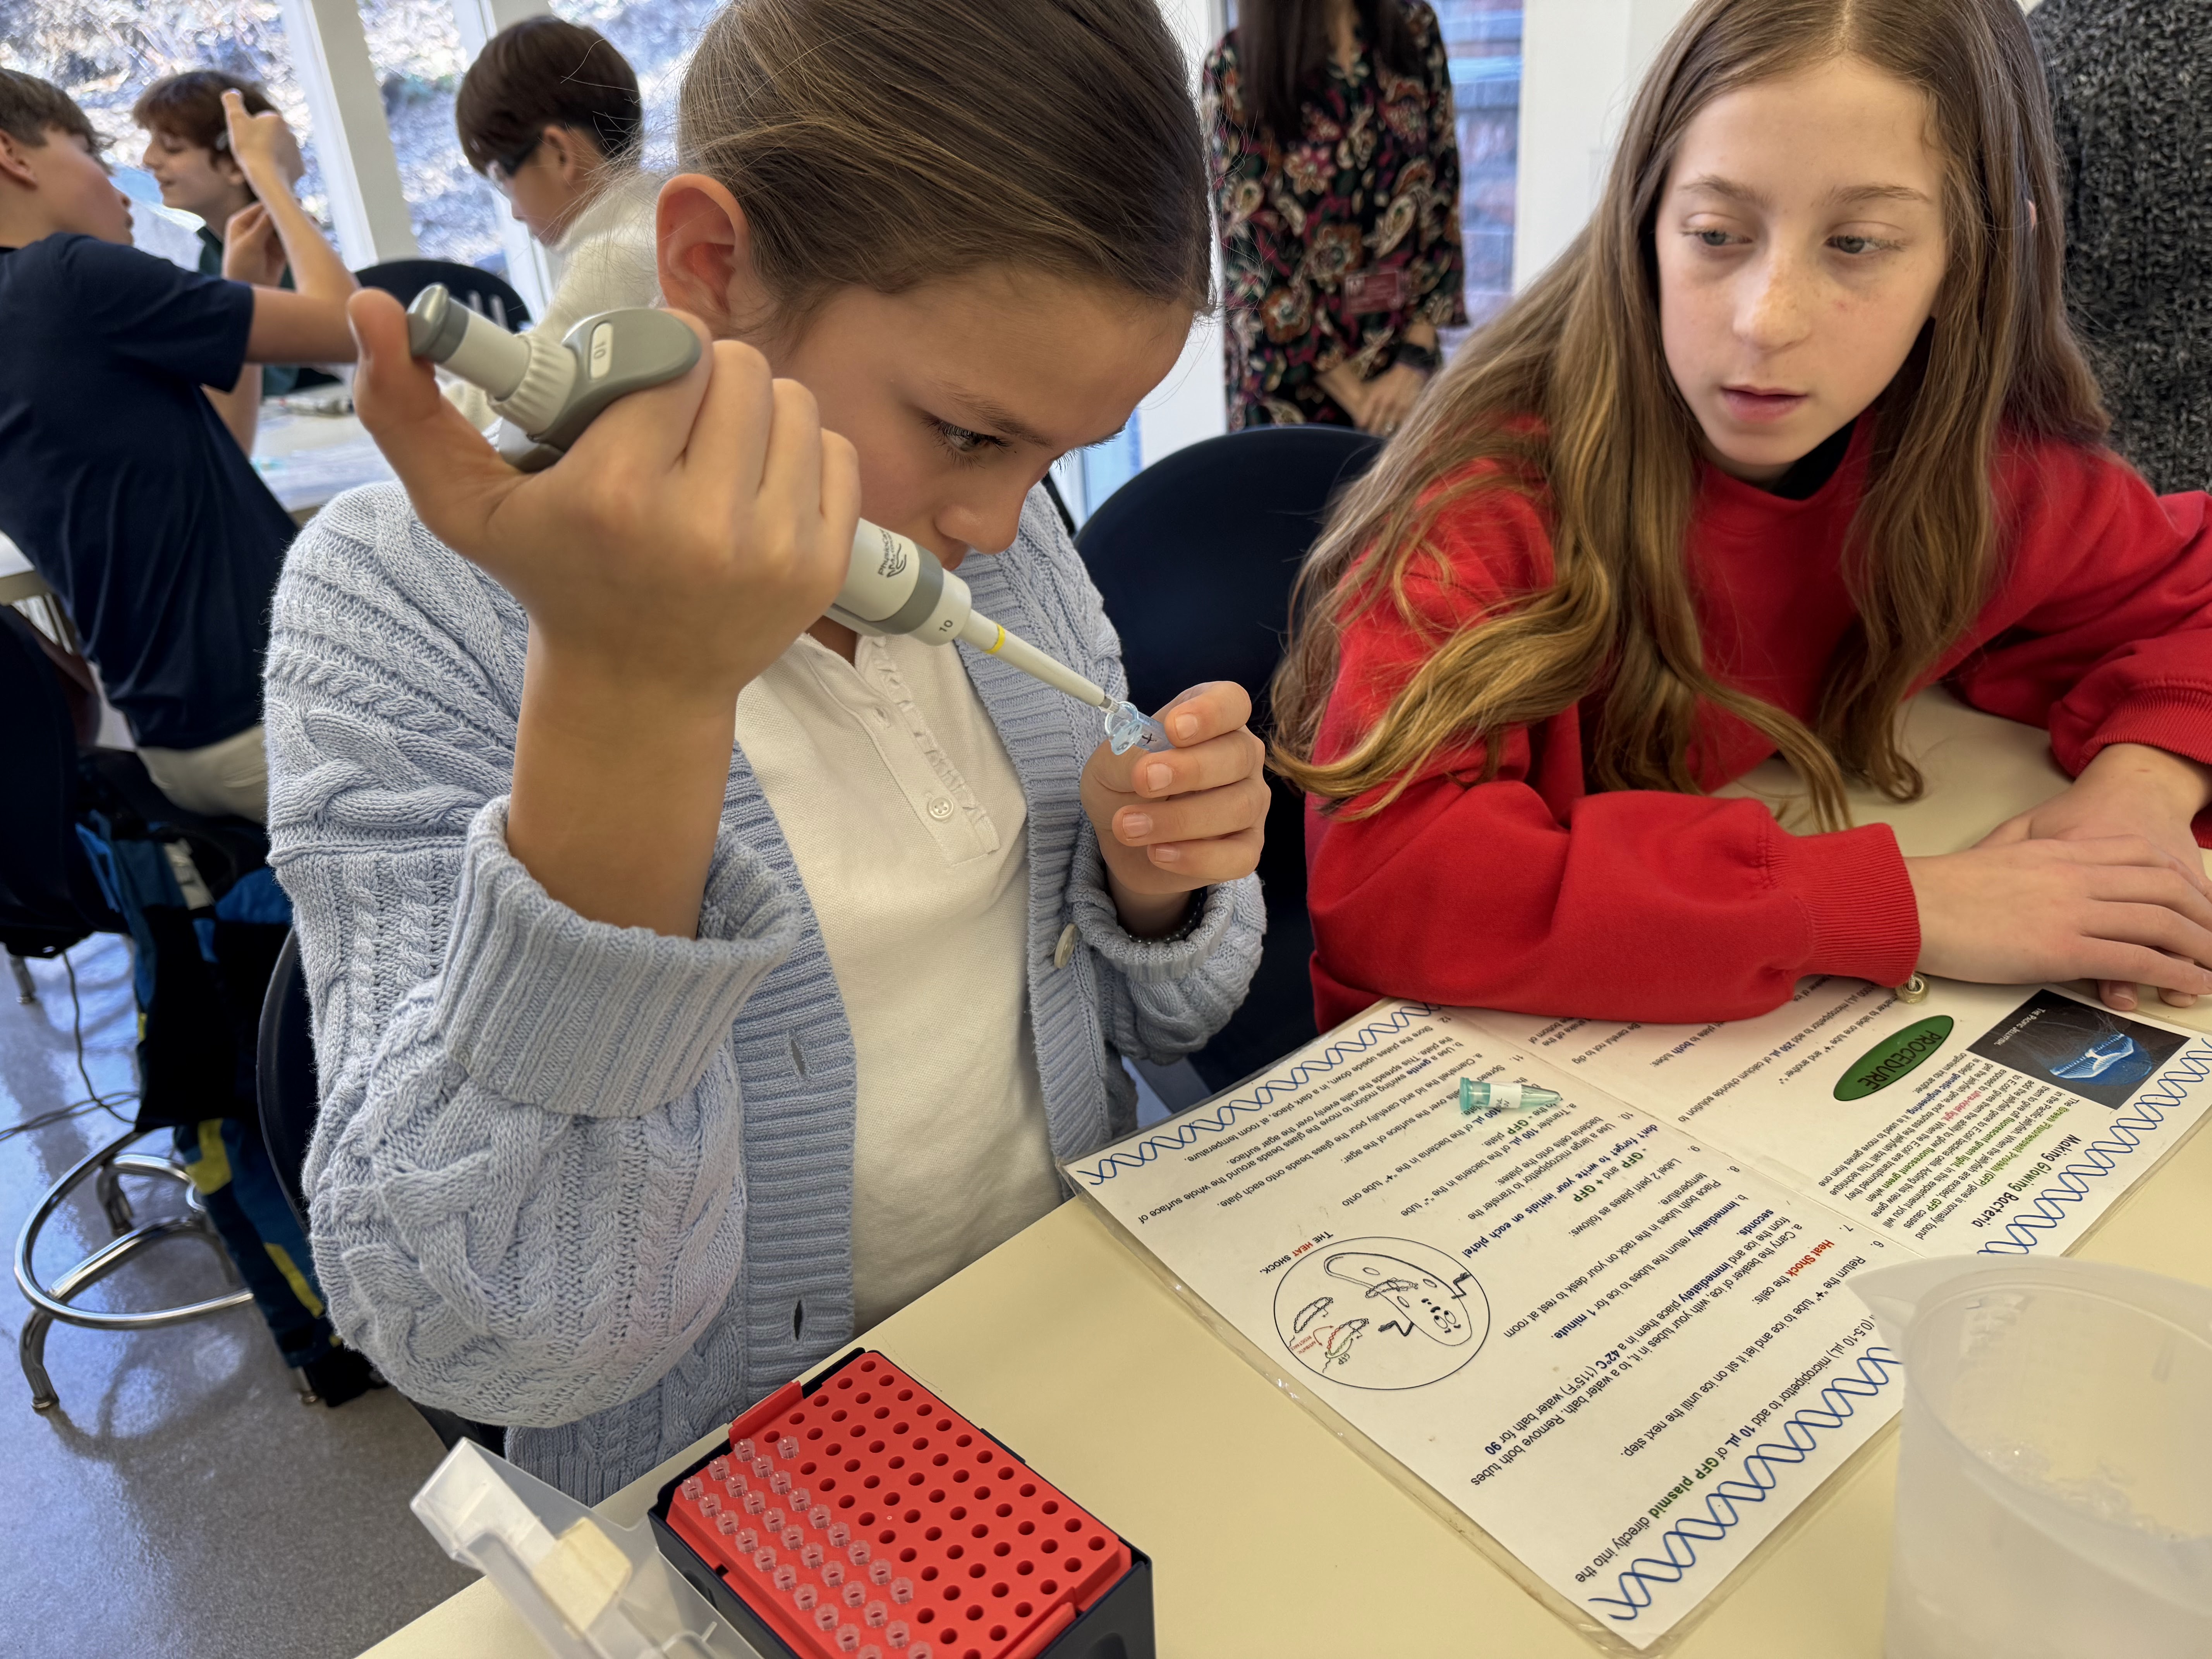 7th graders go hands-on with genetic engineering using CRISPR-image